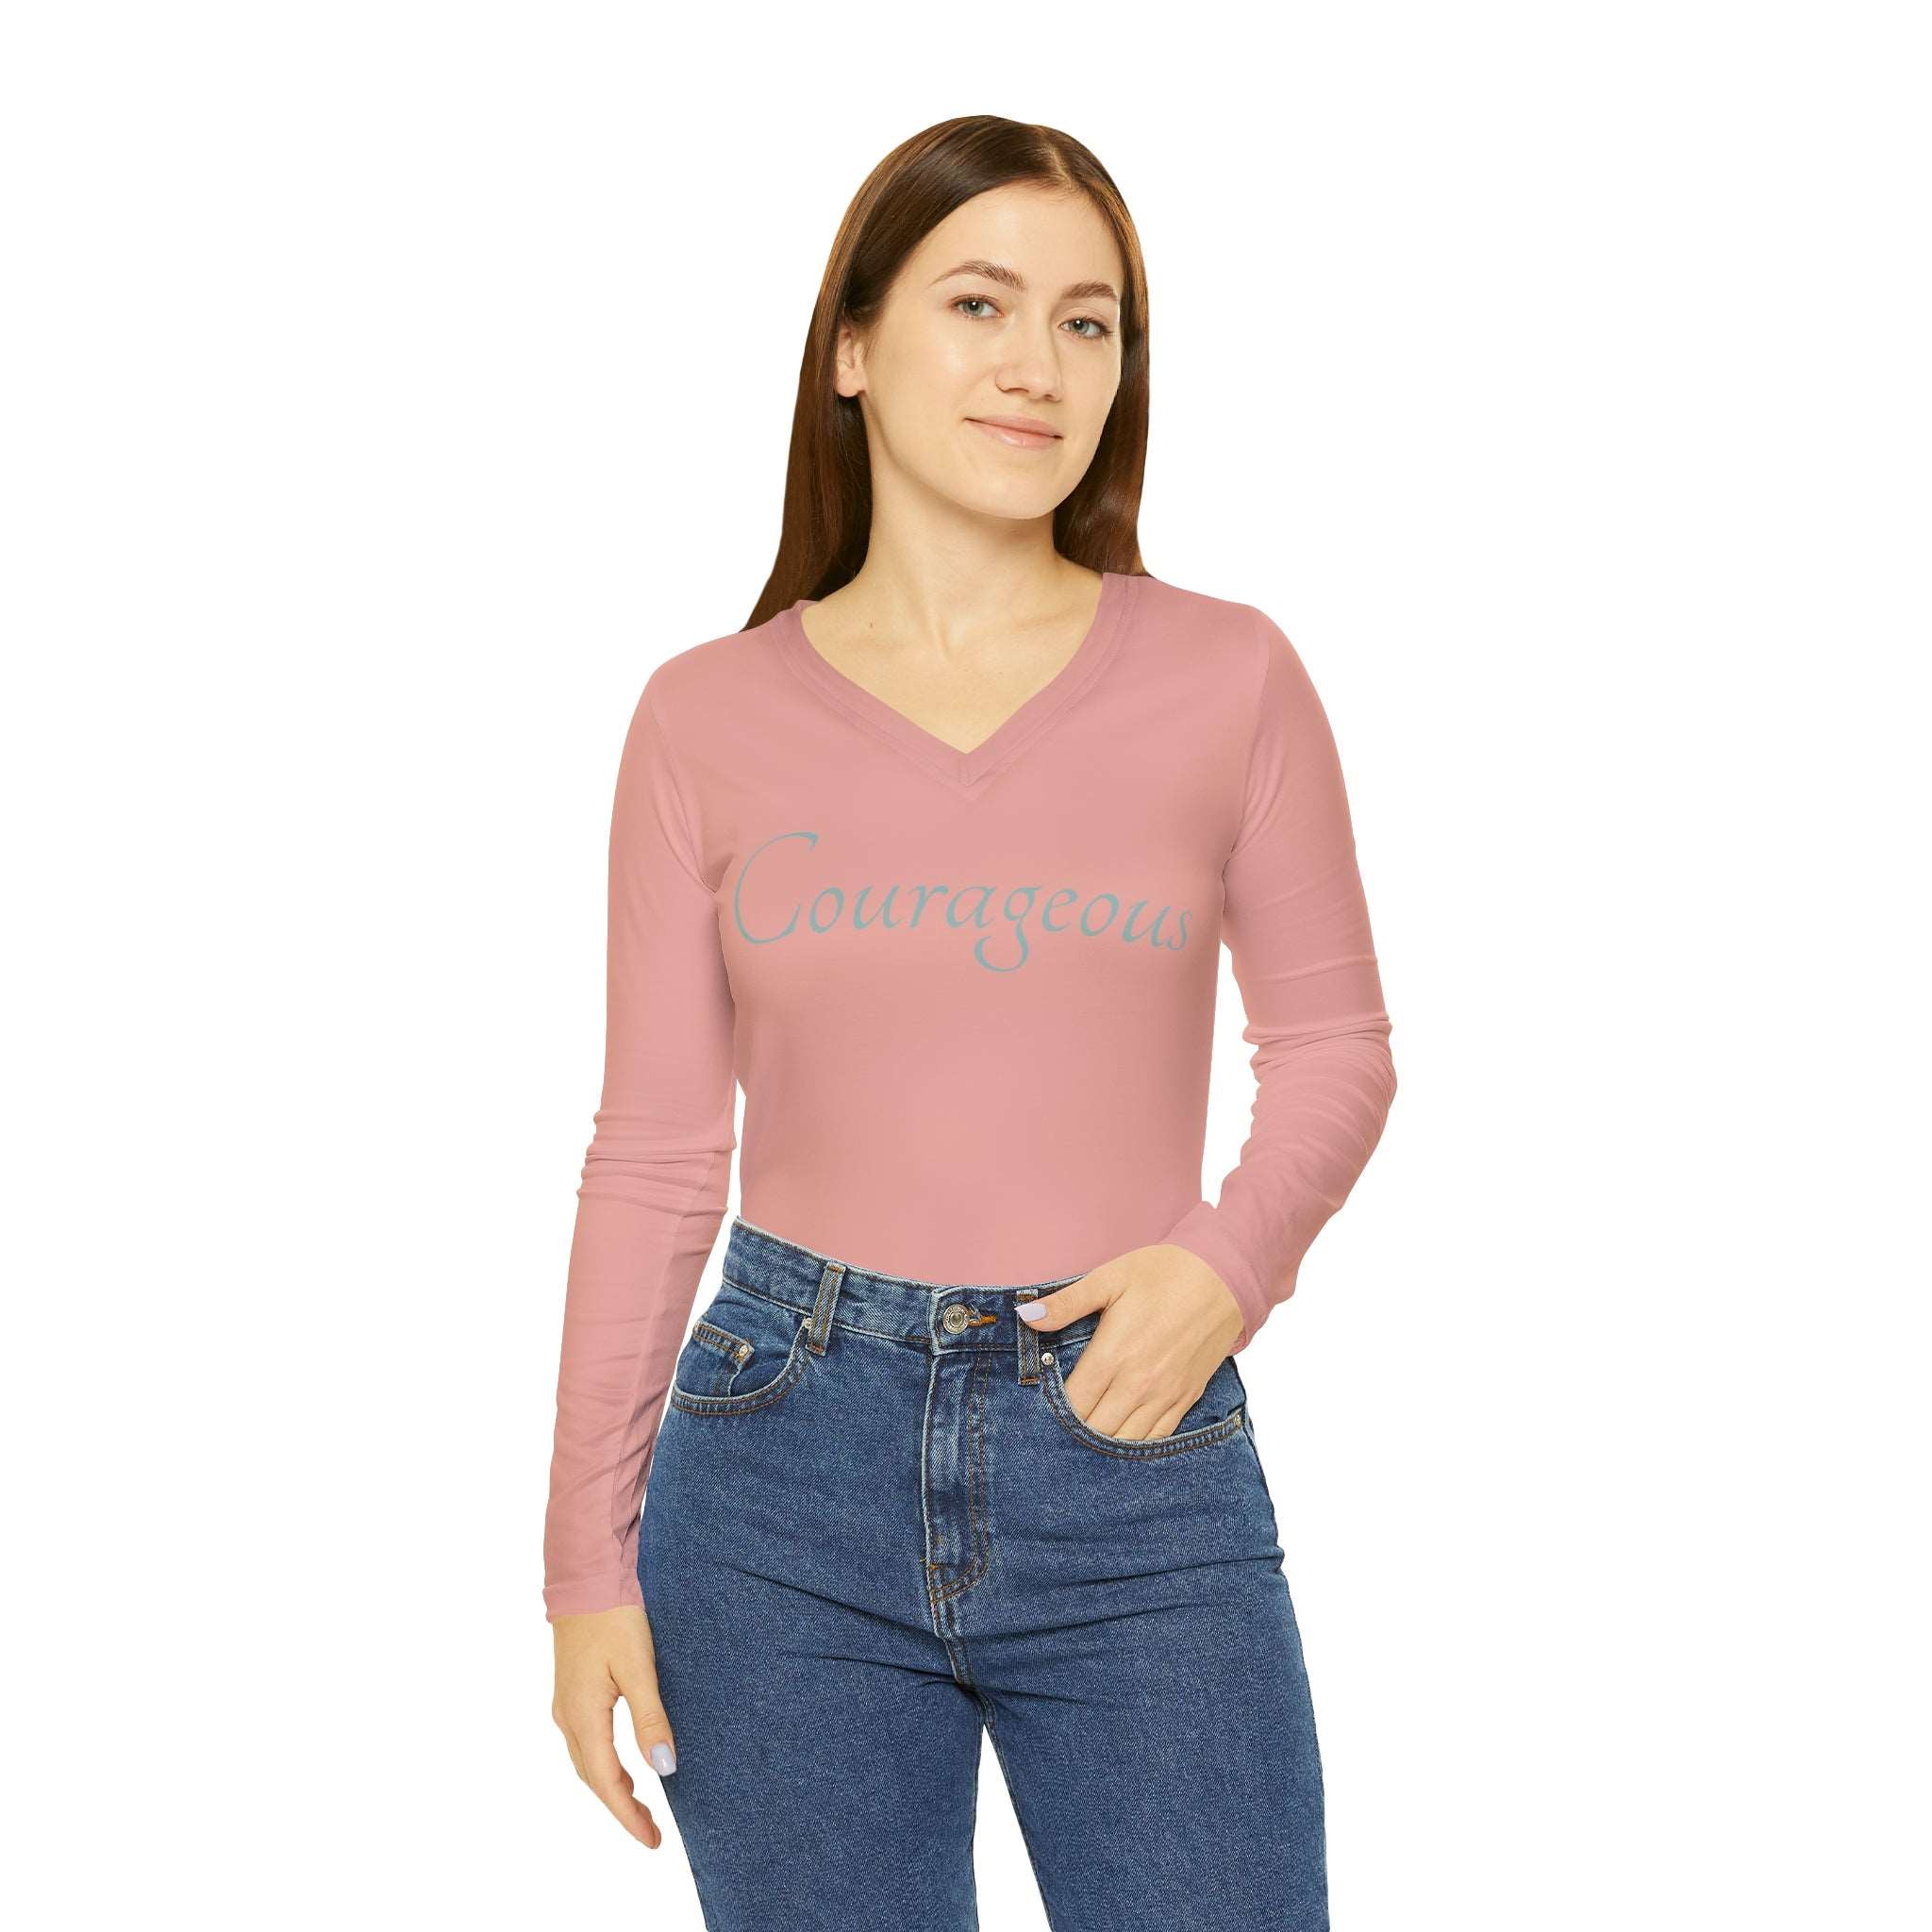 Courageous Long Sleeve V-Neck: Start Conversations Casual Shirt Double Needle Stitching Everyday Wear Mental Health Donation Polyester Spandex Blend Statement Shirt Strong Shirt Tee for Women All Over Prints 8388254402449686565_2048_a2f245b4-90a7-4dc4-b088-889278992c8d Printify